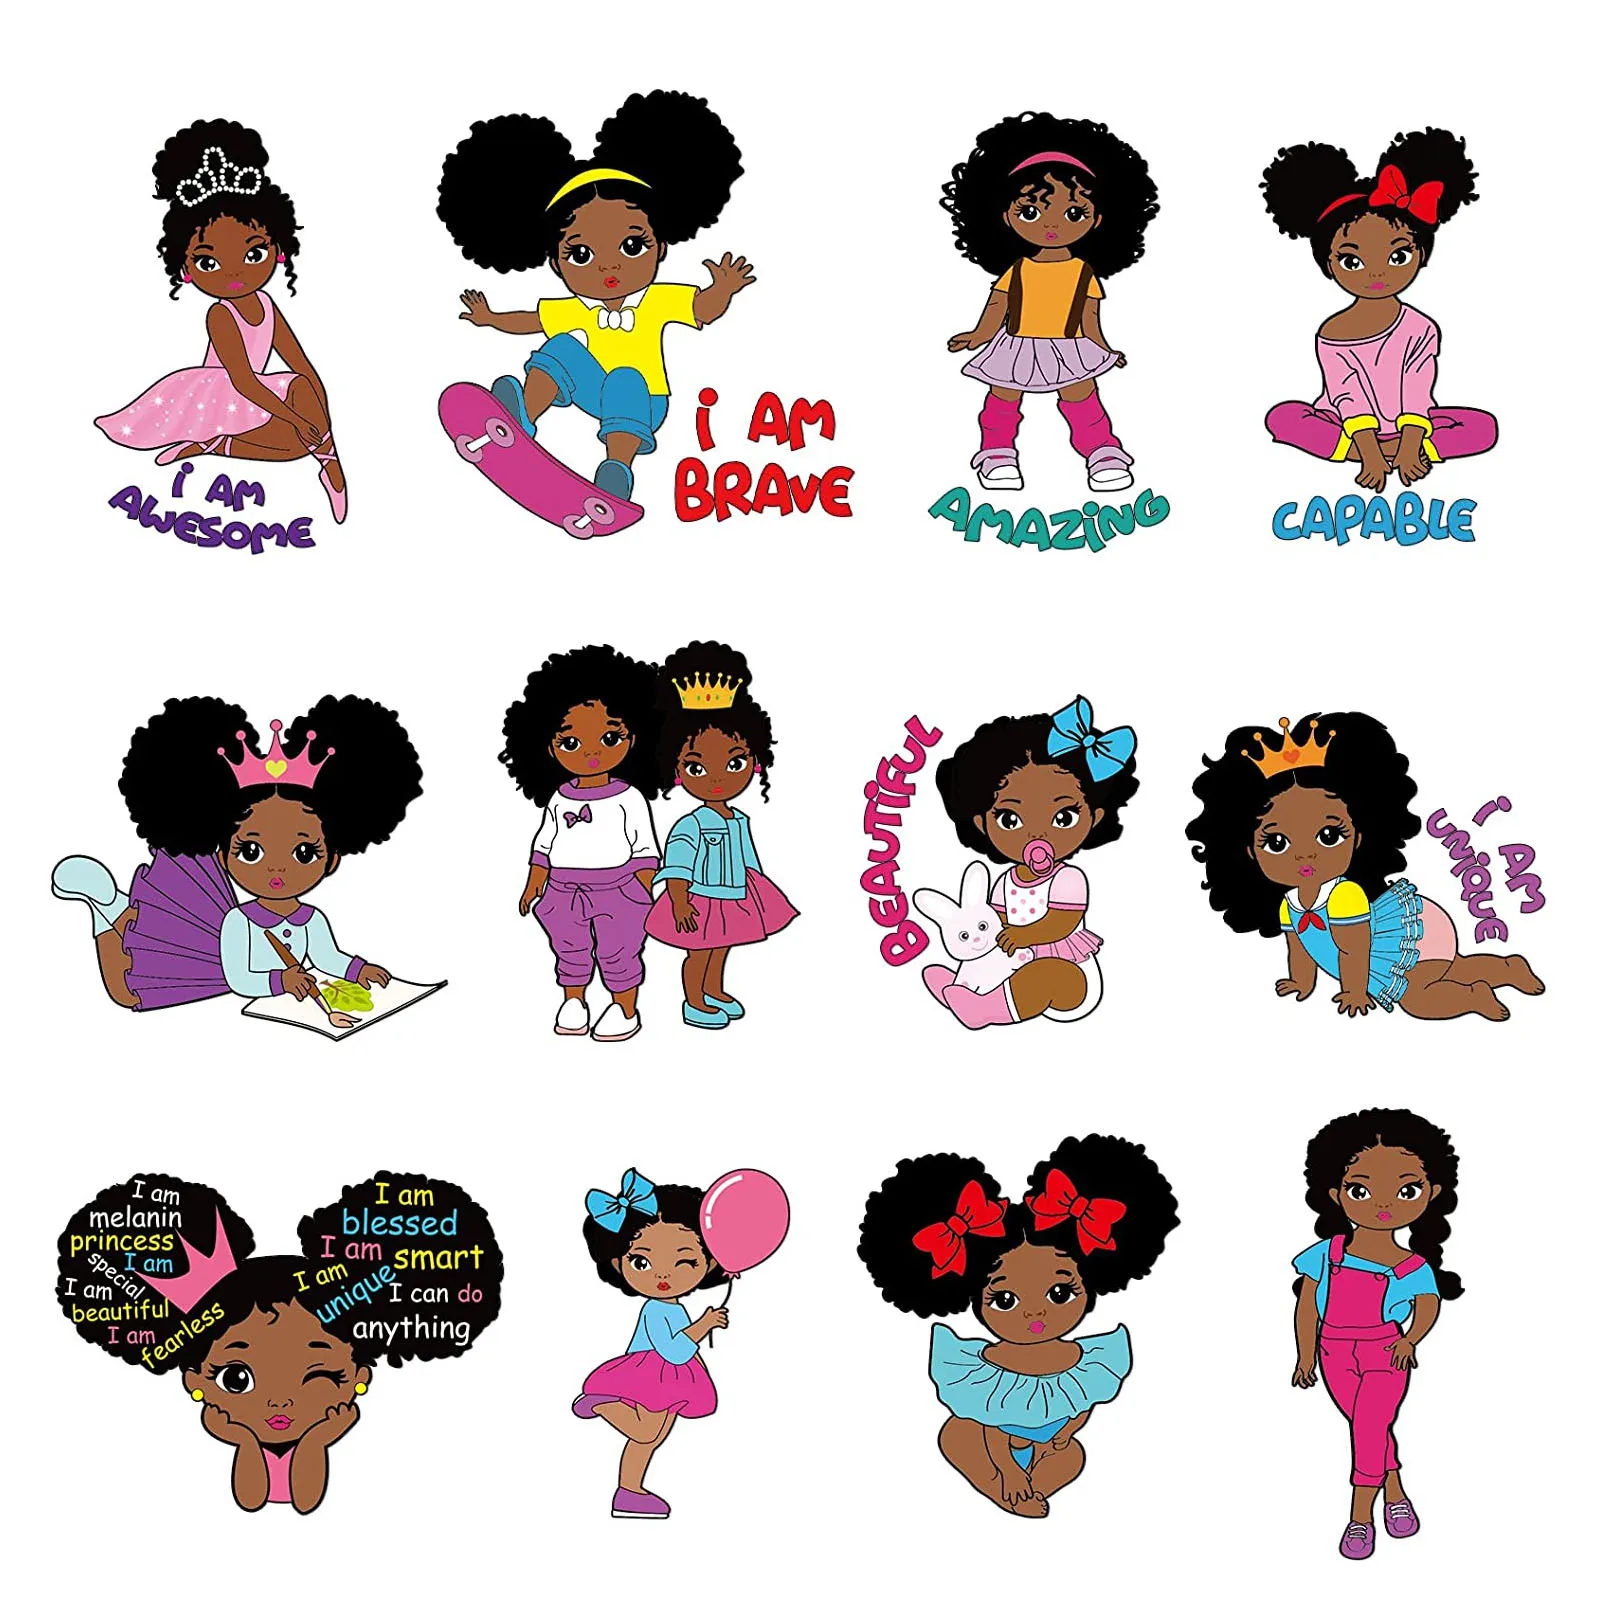 Black Girl Iron on Patches Decals Black Afro Kid Cute Heat Transfer Sticker for T-Shirt Jeans Coat Backpacks Clothing